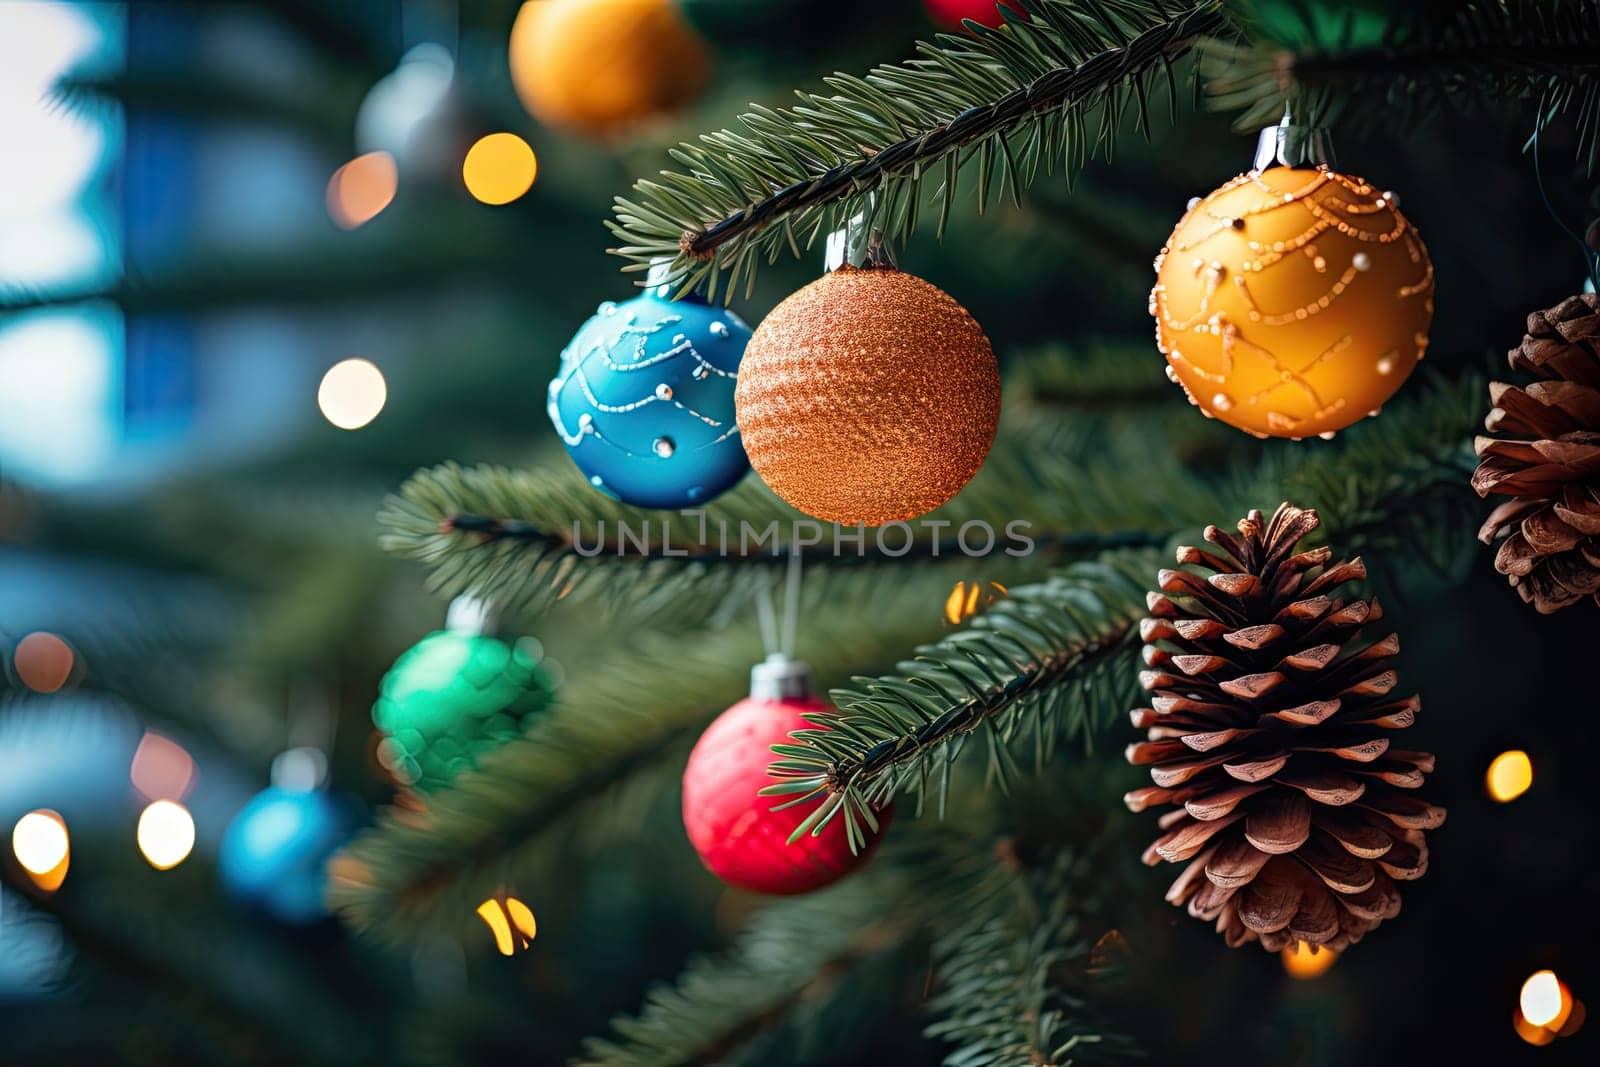 A close up of a christmas tree with ornaments on it by golibtolibov